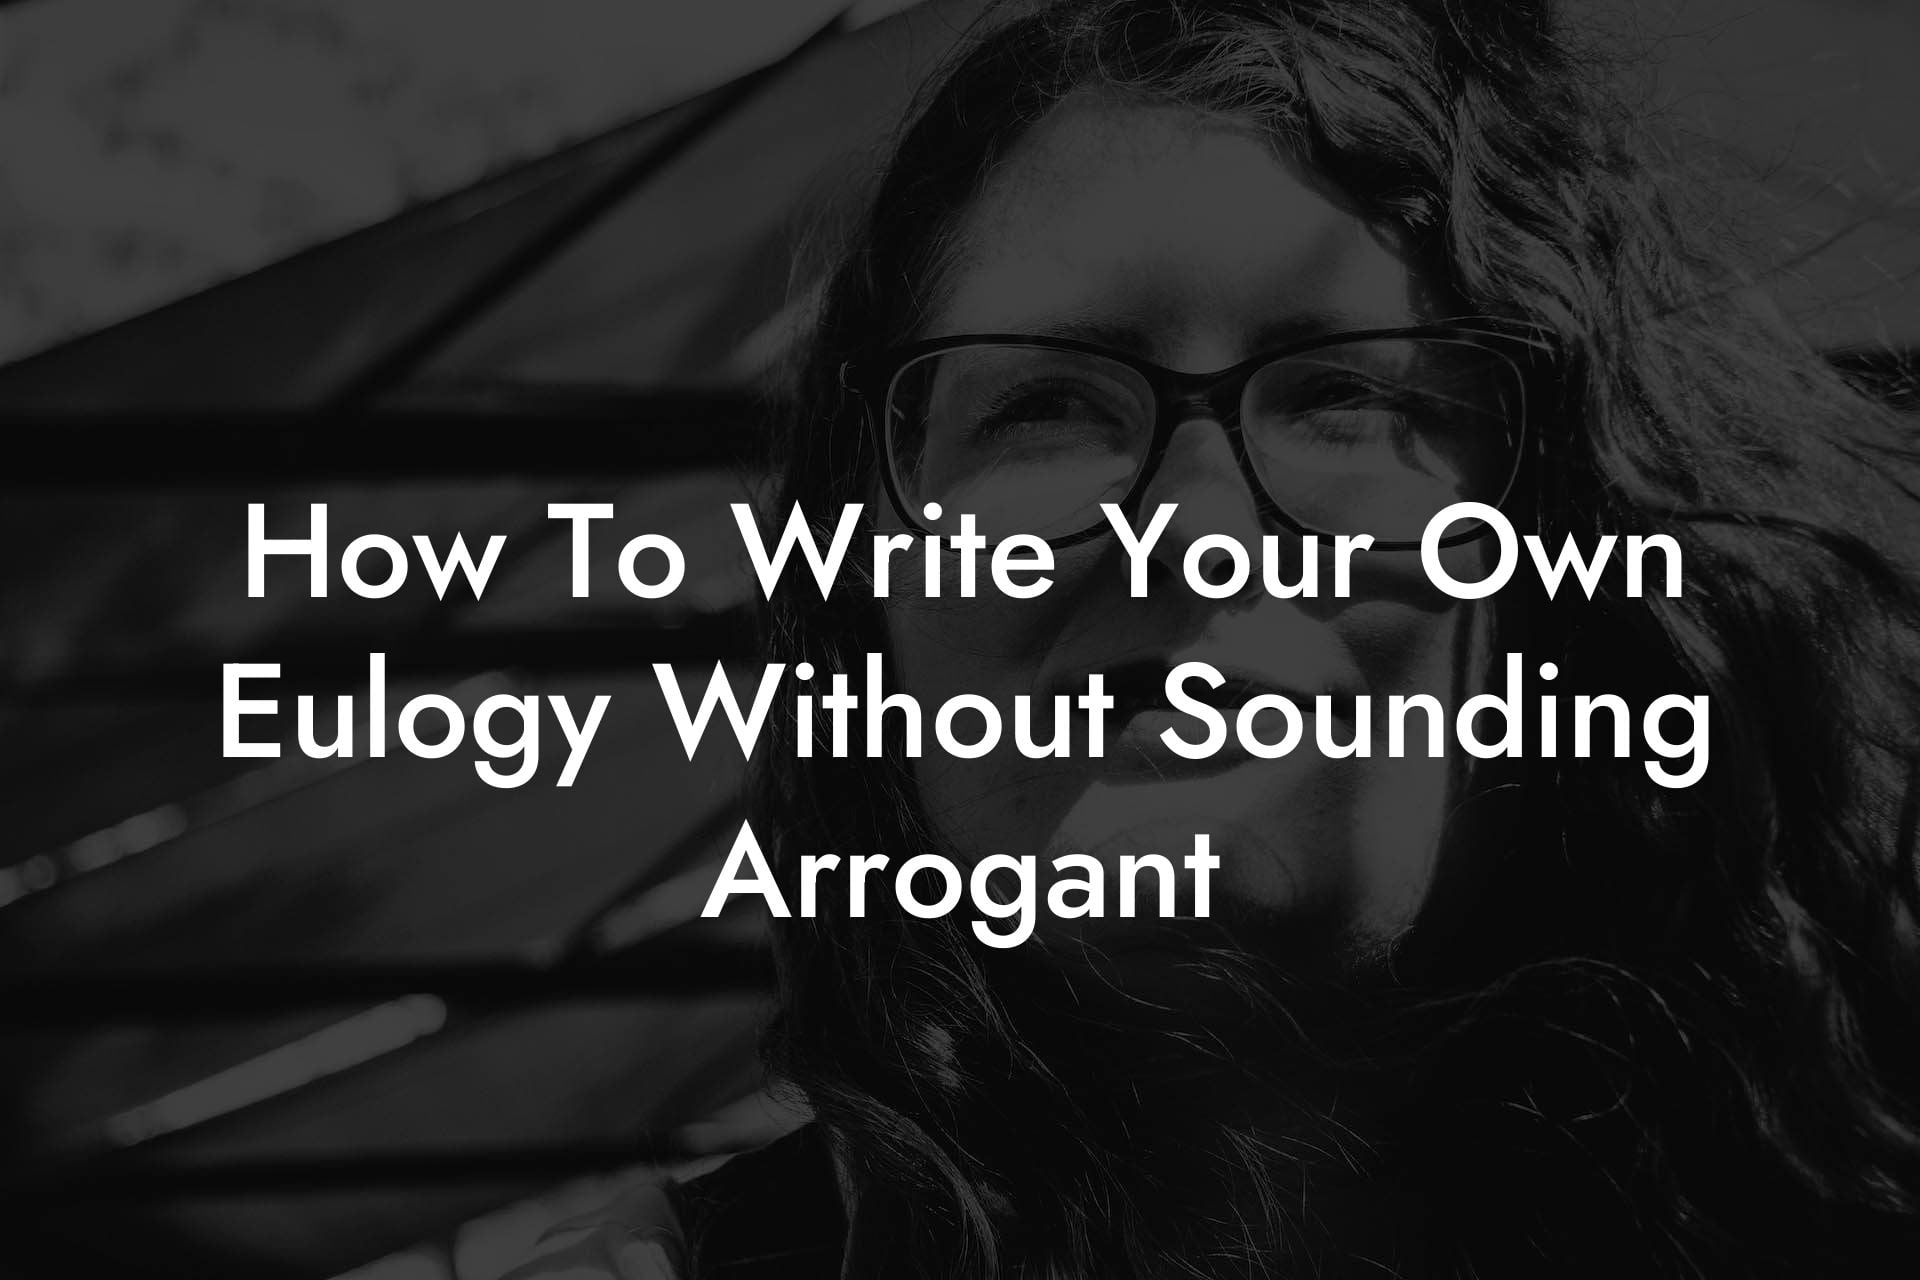 How To Write Your Own Eulogy Without Sounding Arrogant